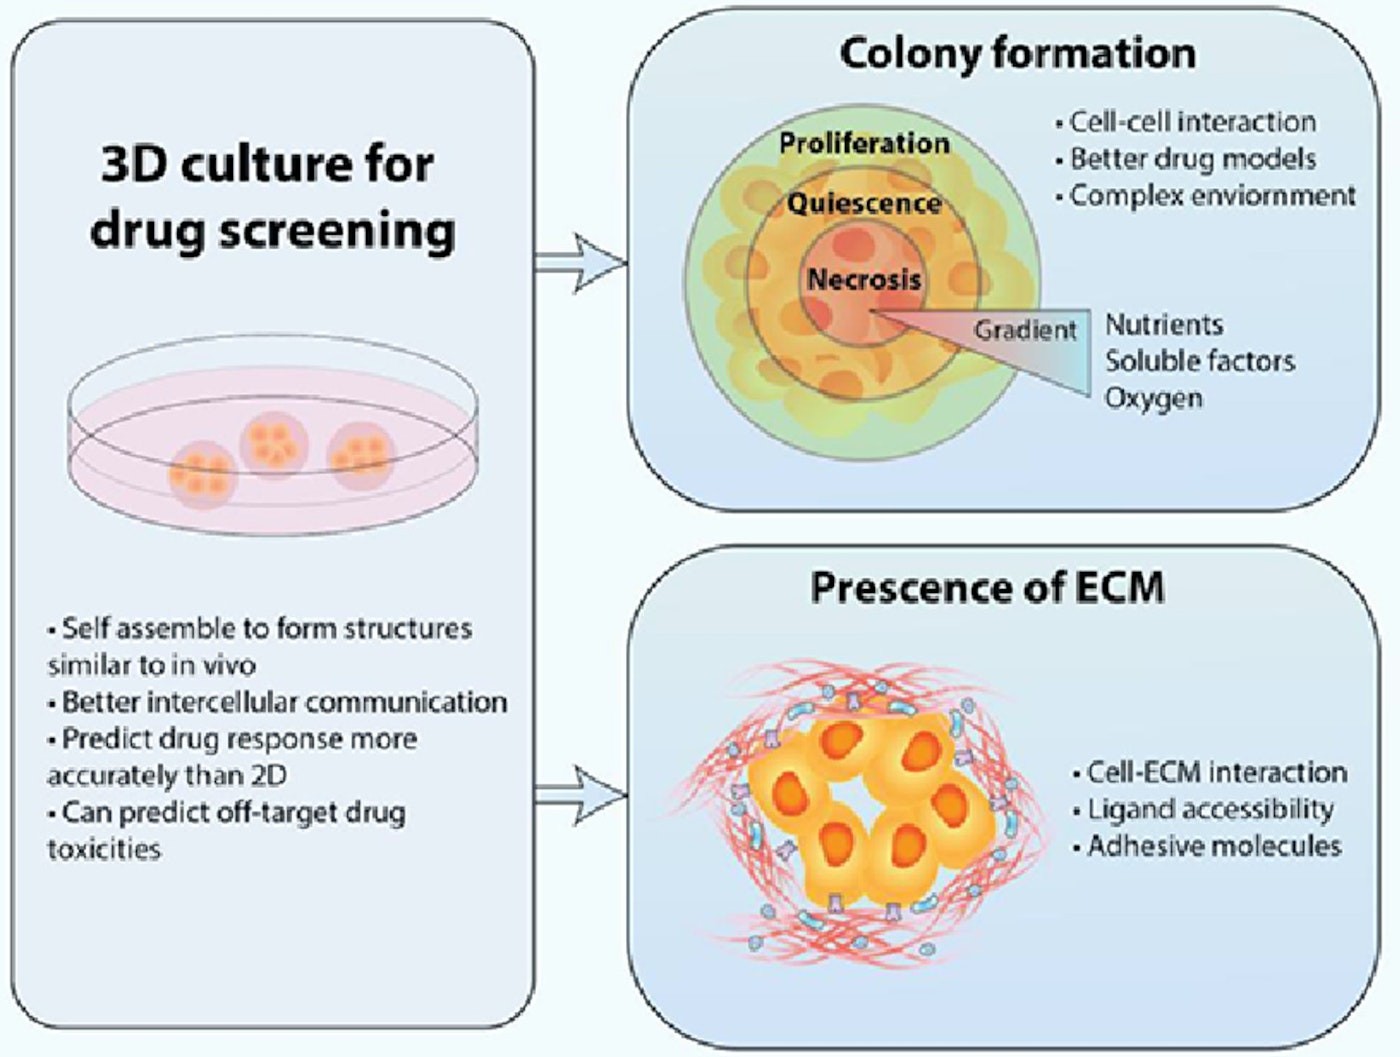 Overview of 3D cell culture for drug screening